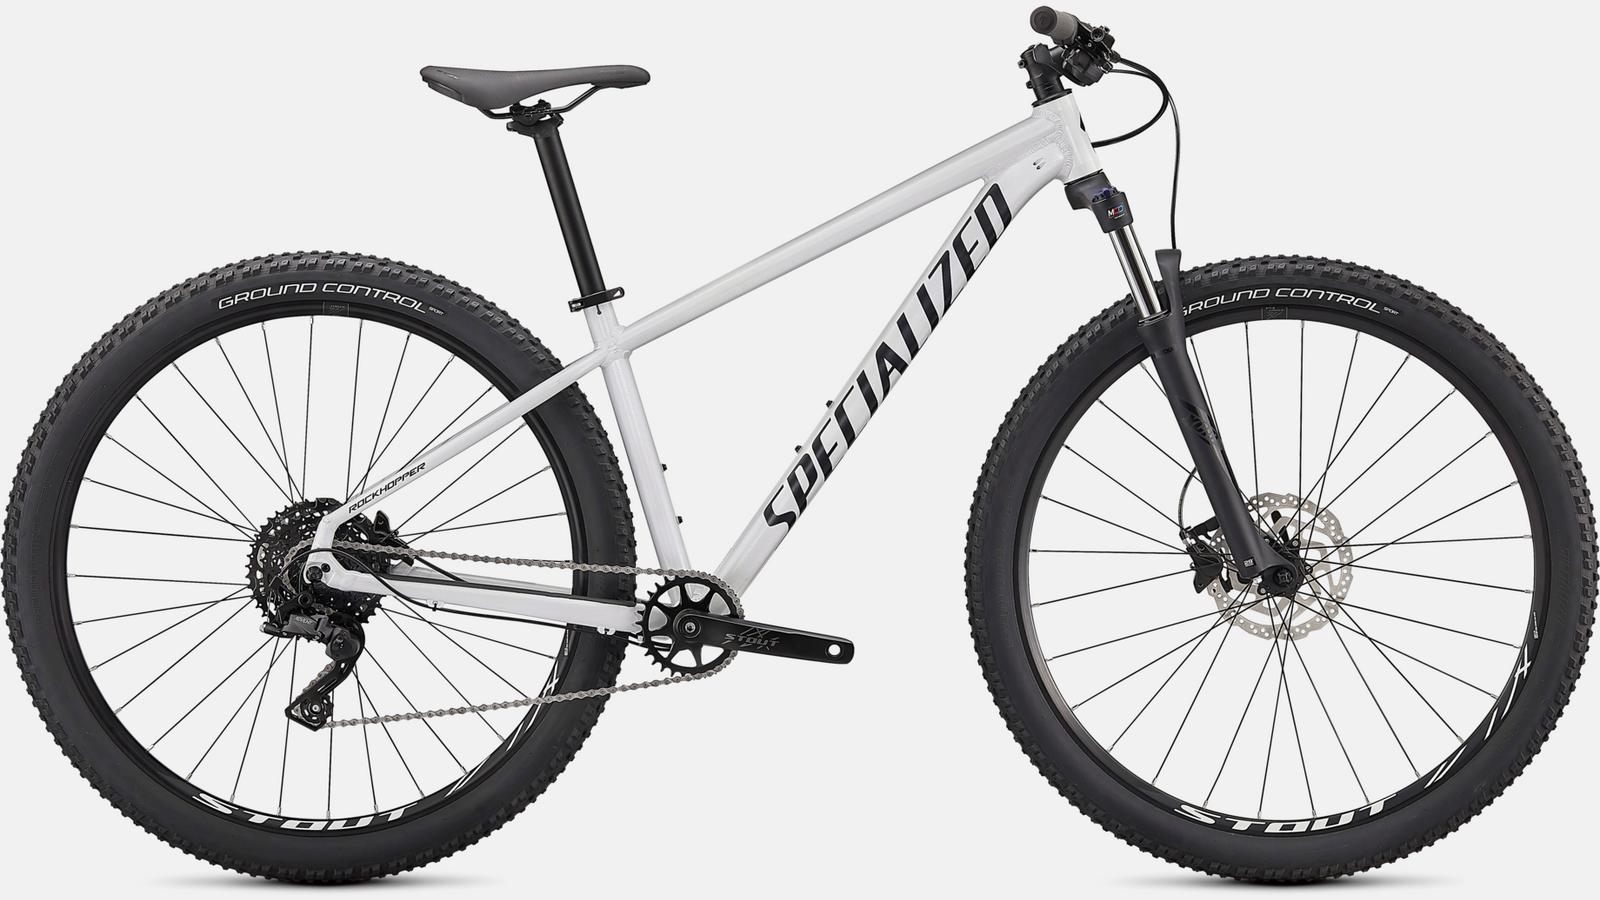 Paint for 2021 Specialized Rockhopper Comp 27.5 - Gloss Metallic White Silver